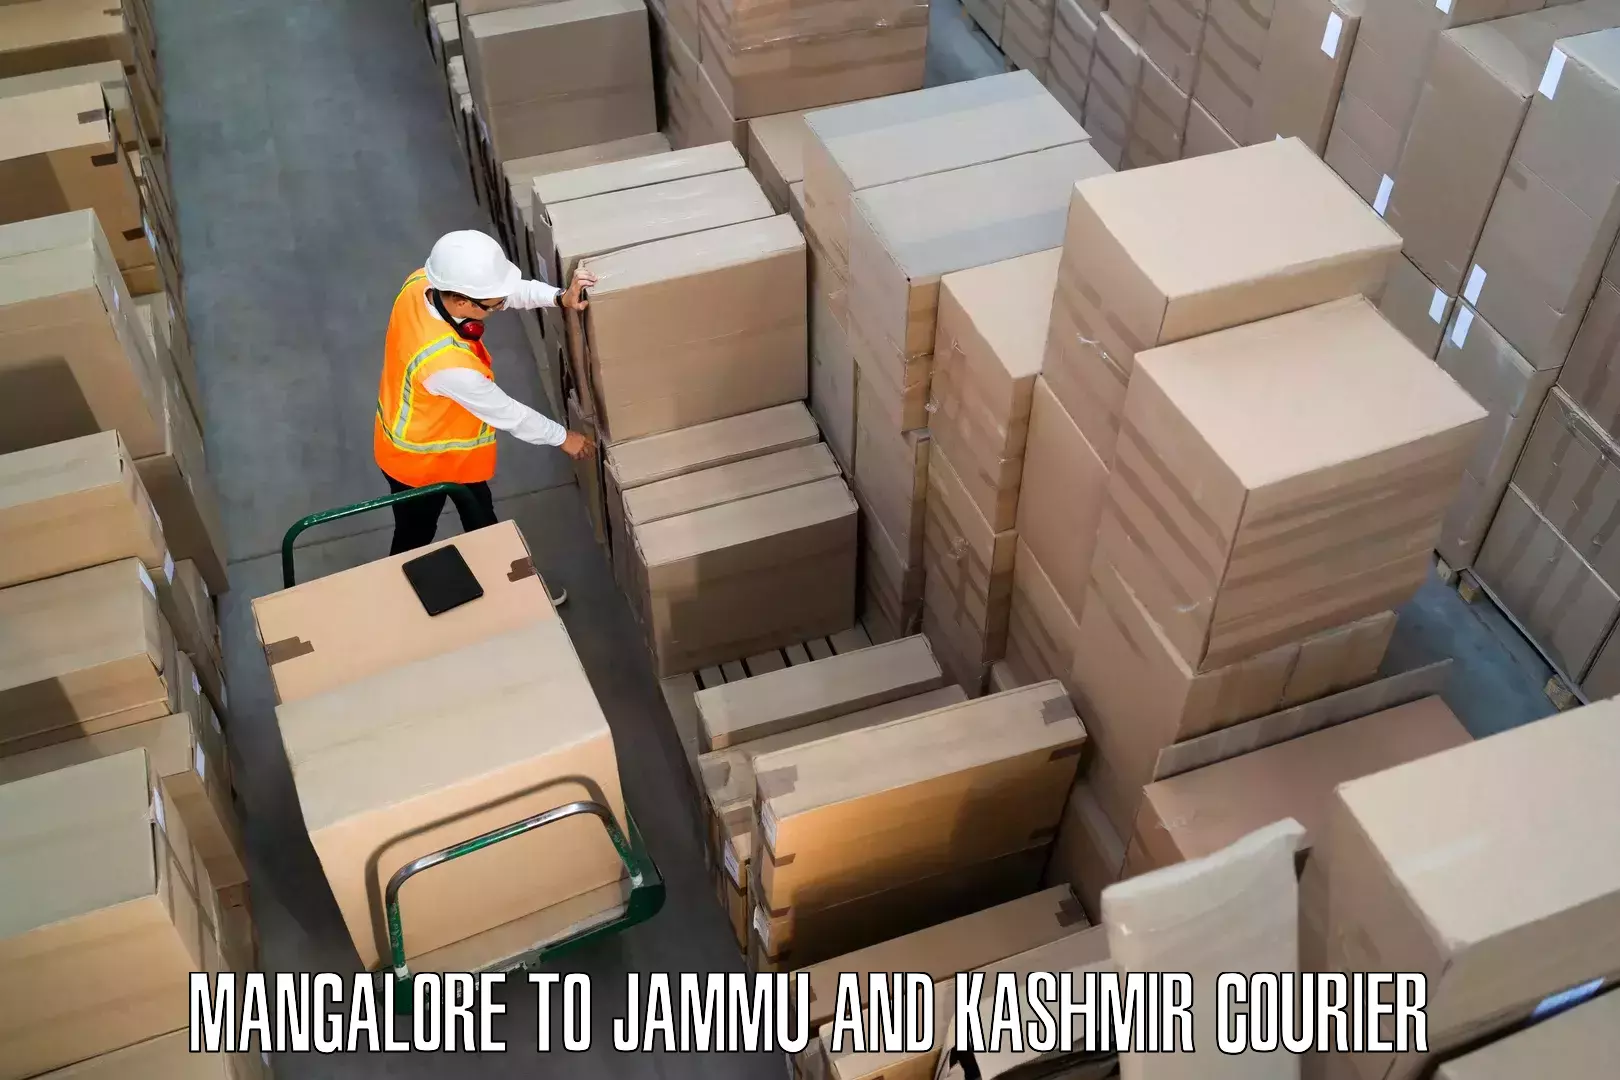 Furniture transport specialists Mangalore to Shopian